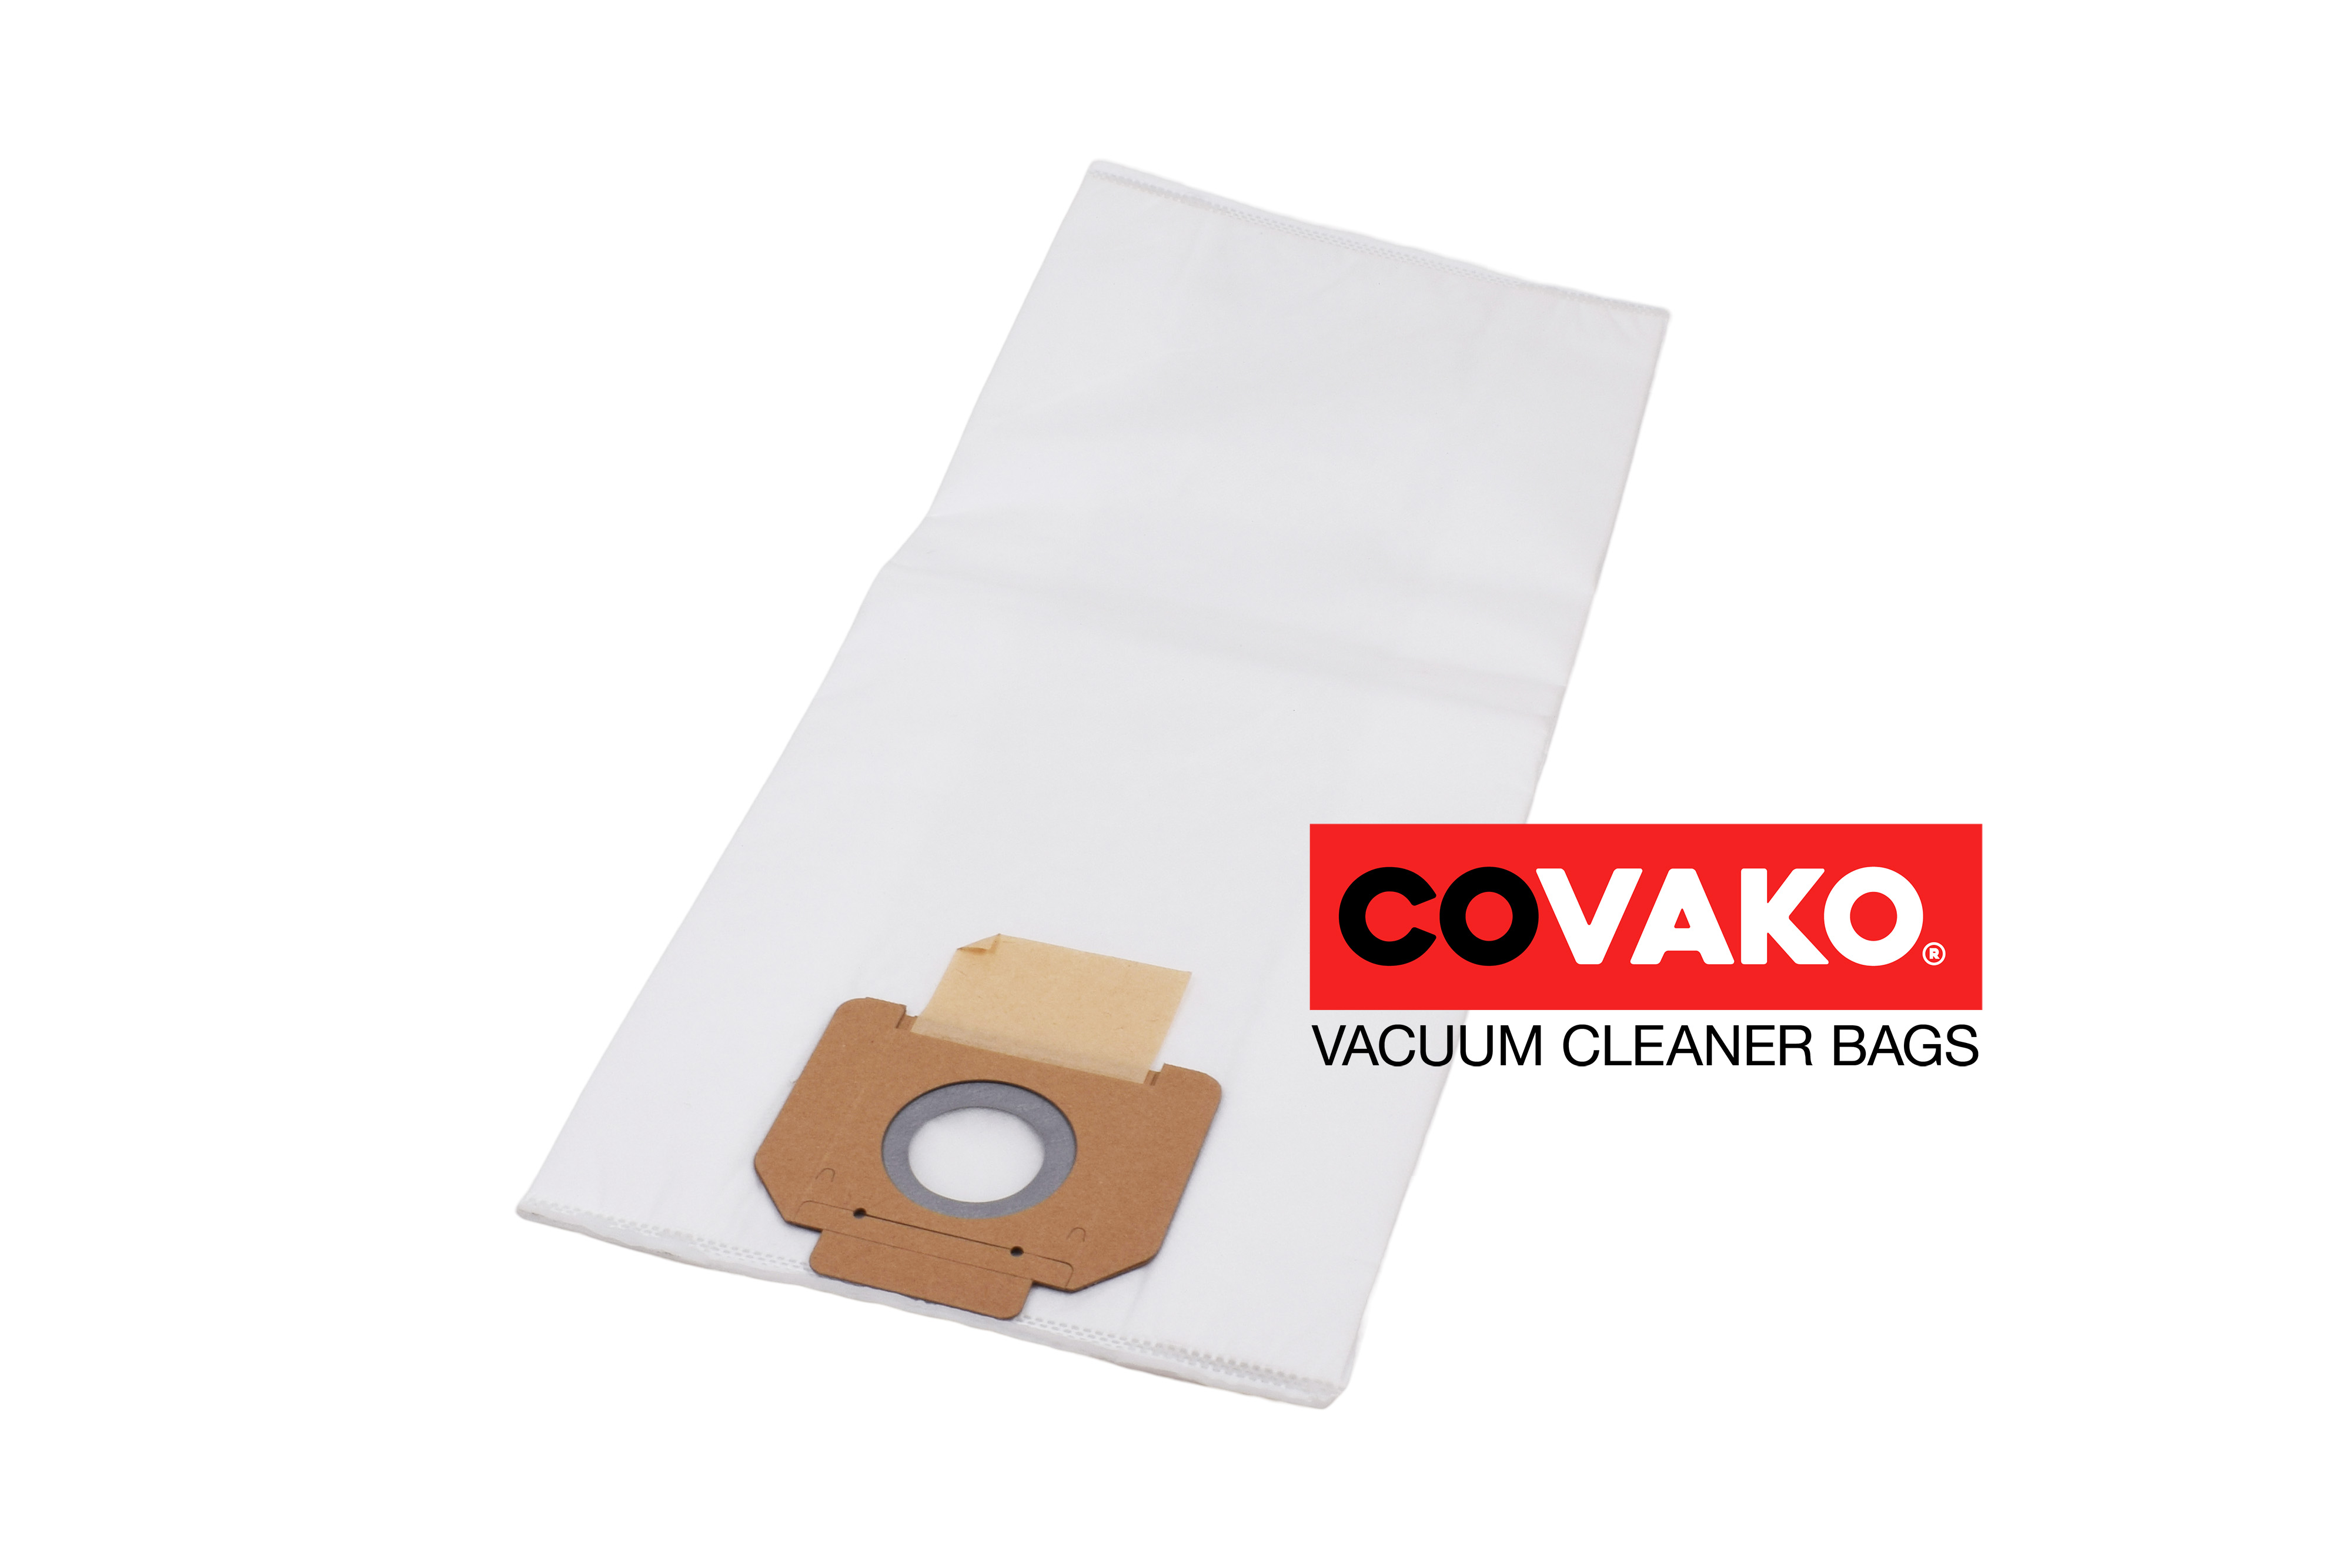 ICA YS 1500-27 / Synthesis - ICA vacuum cleaner bags